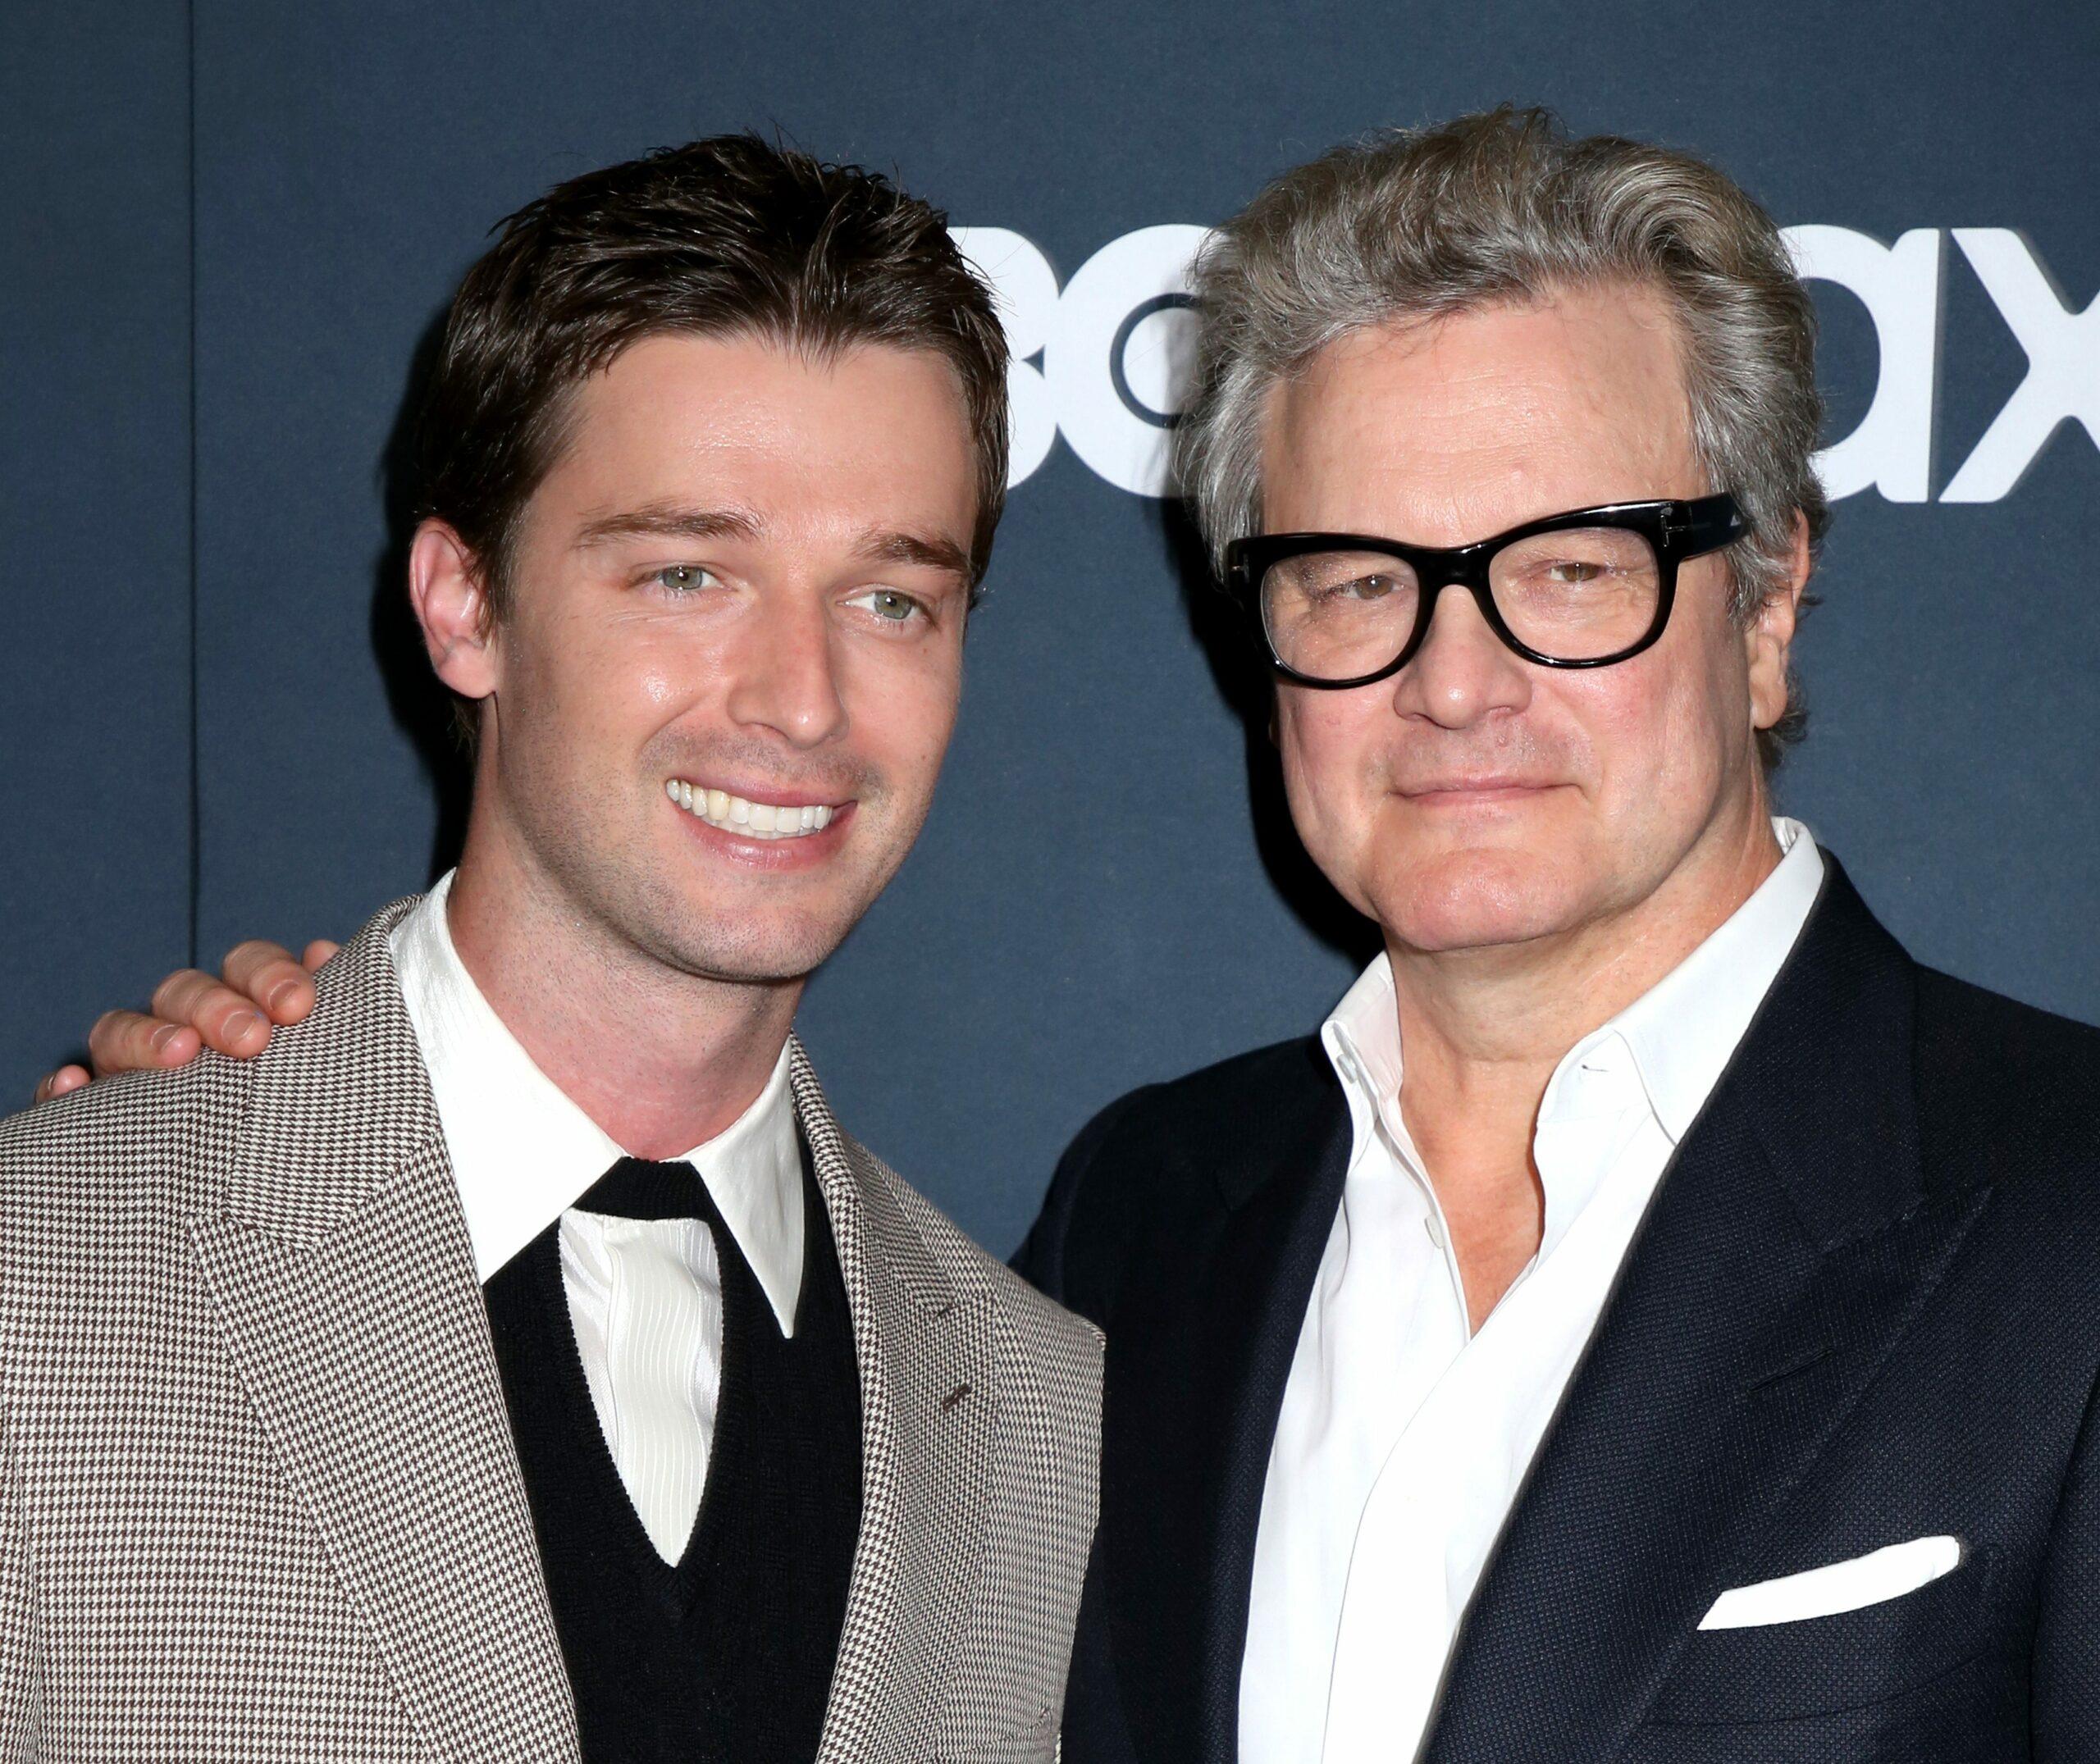 Colin Firth and Patrick Schwarzenegger attending HBO Max's 'The Staircase' Premiere held at MoMA on May 3, 2022 in New York City, NY 